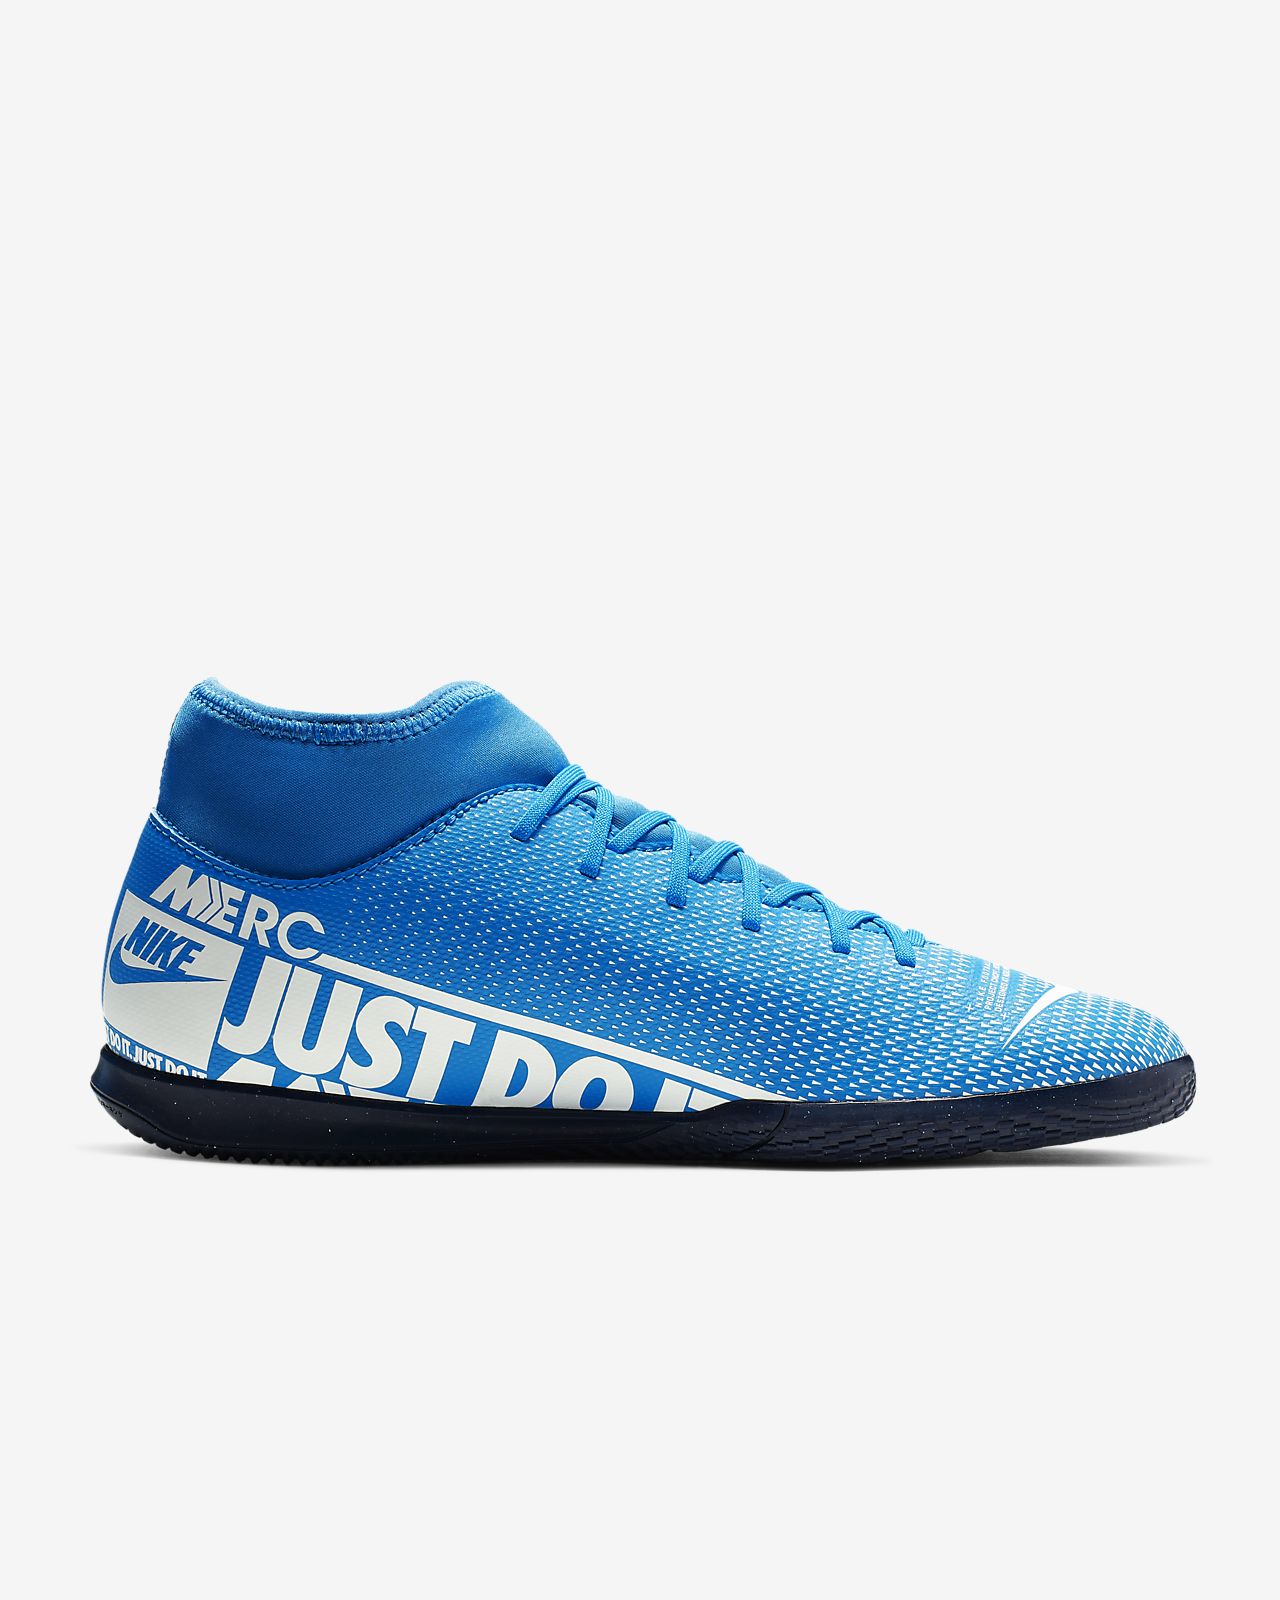 Shop Nike Superfly 7 Club MDS IC Shoes online in Dubai.